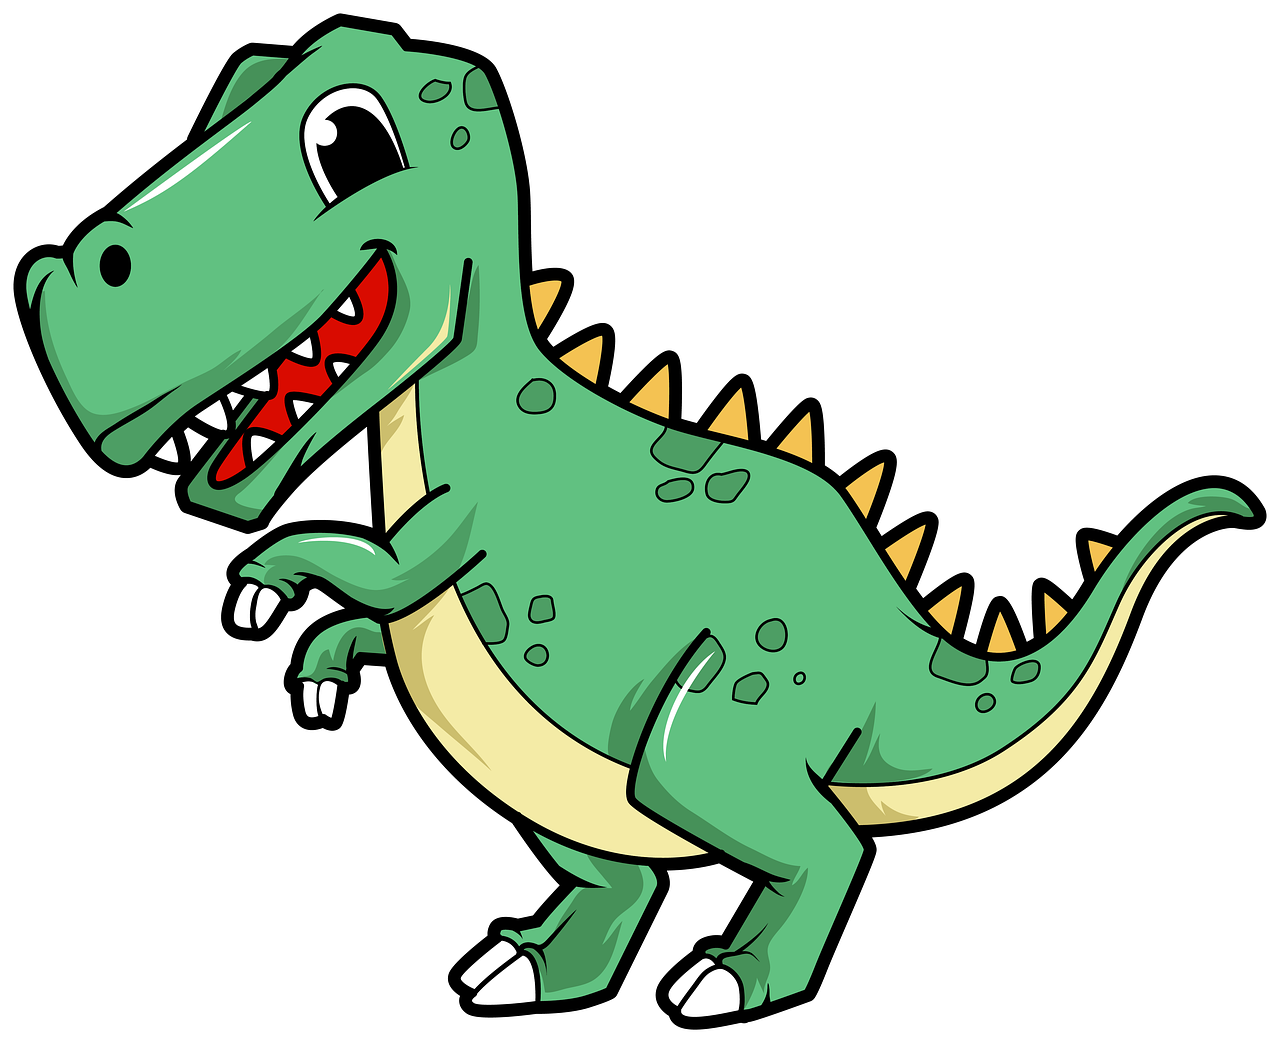 a cartoon dinosaur running with its mouth open, an illustration of, inspired by Abidin Dino, pixabay, with a black background, grinning lasciviously, cute cartoon, creeper